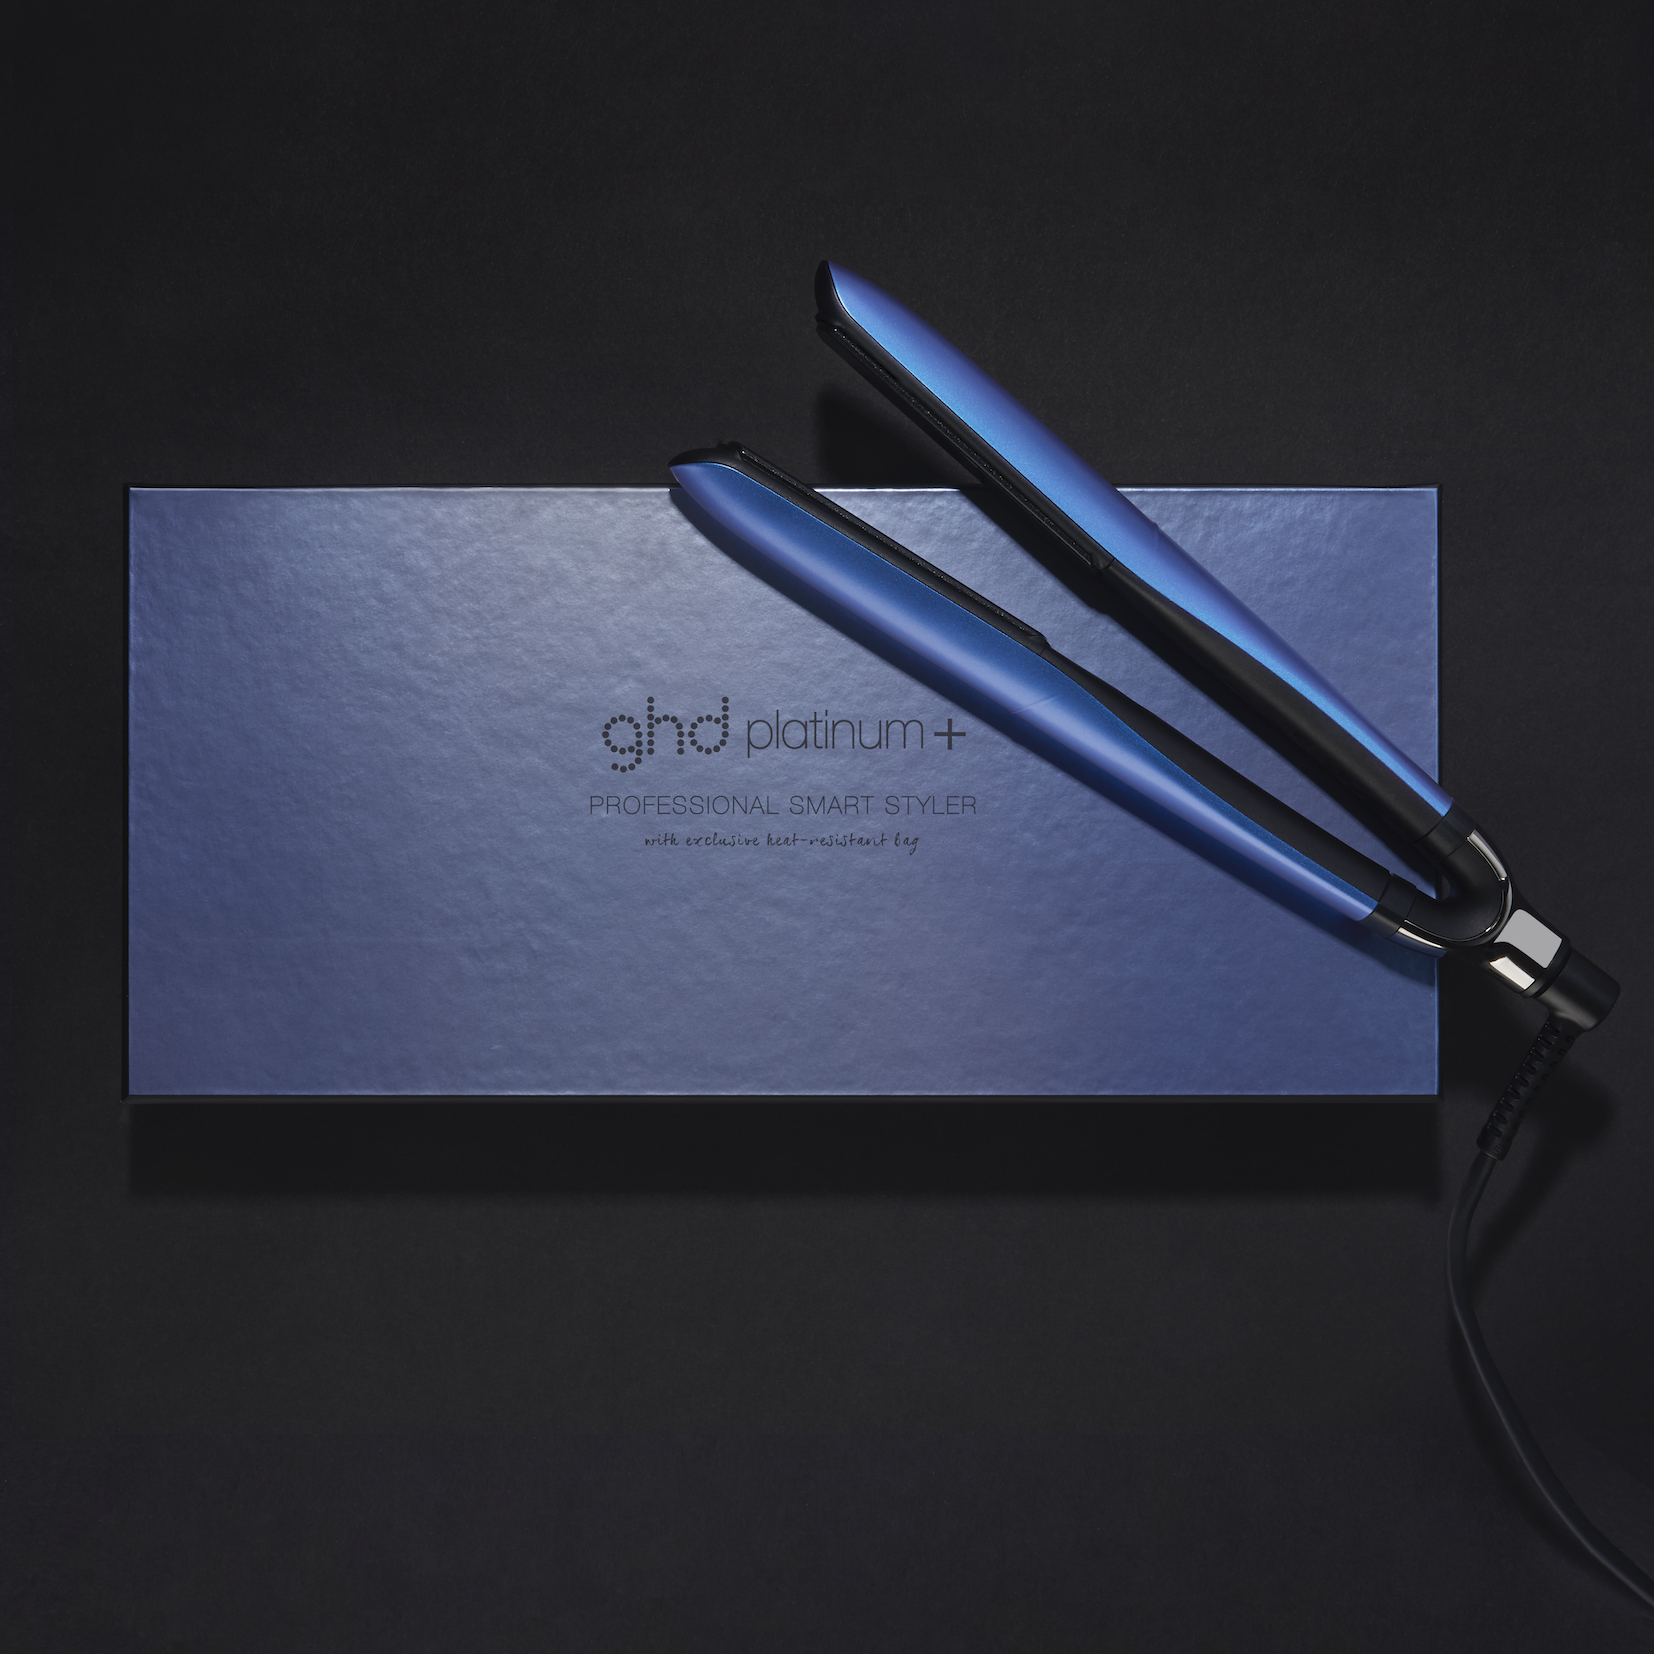 ghd Upbeat Collection platinum+ styler_Campaign Imagery_Cobalt Blue (4)